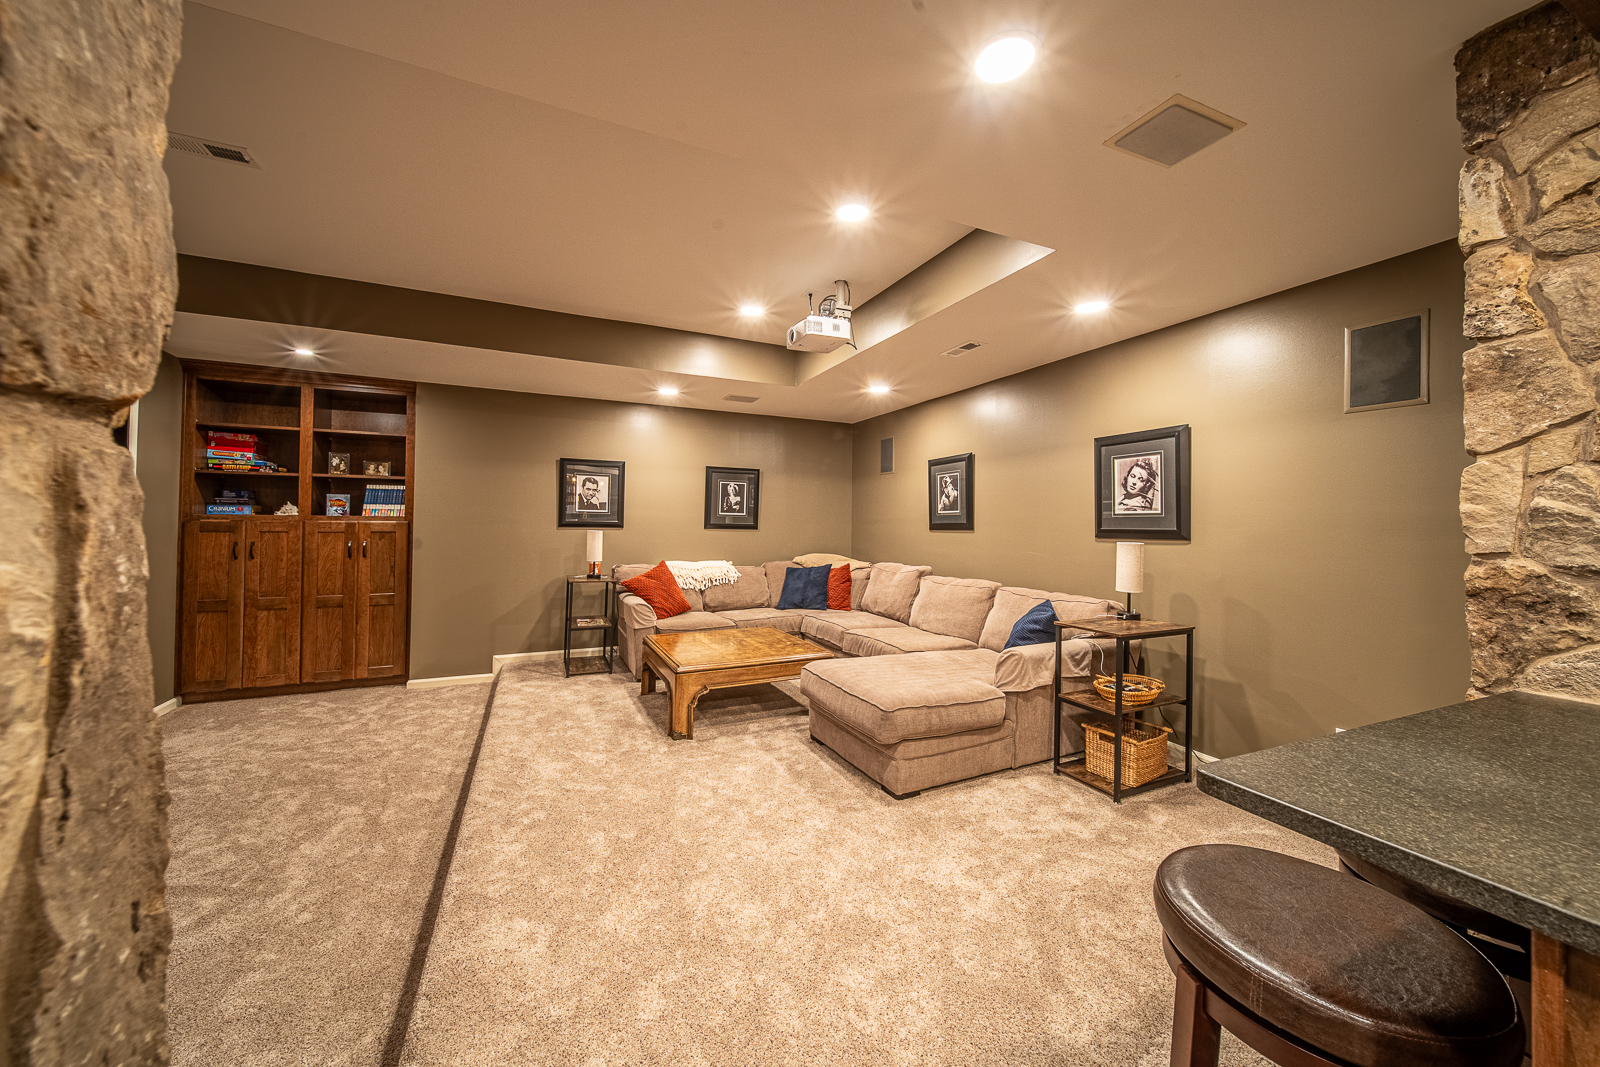 Inviting living room area in the rustic-themed basement remodel on Ripple Creek Drive.